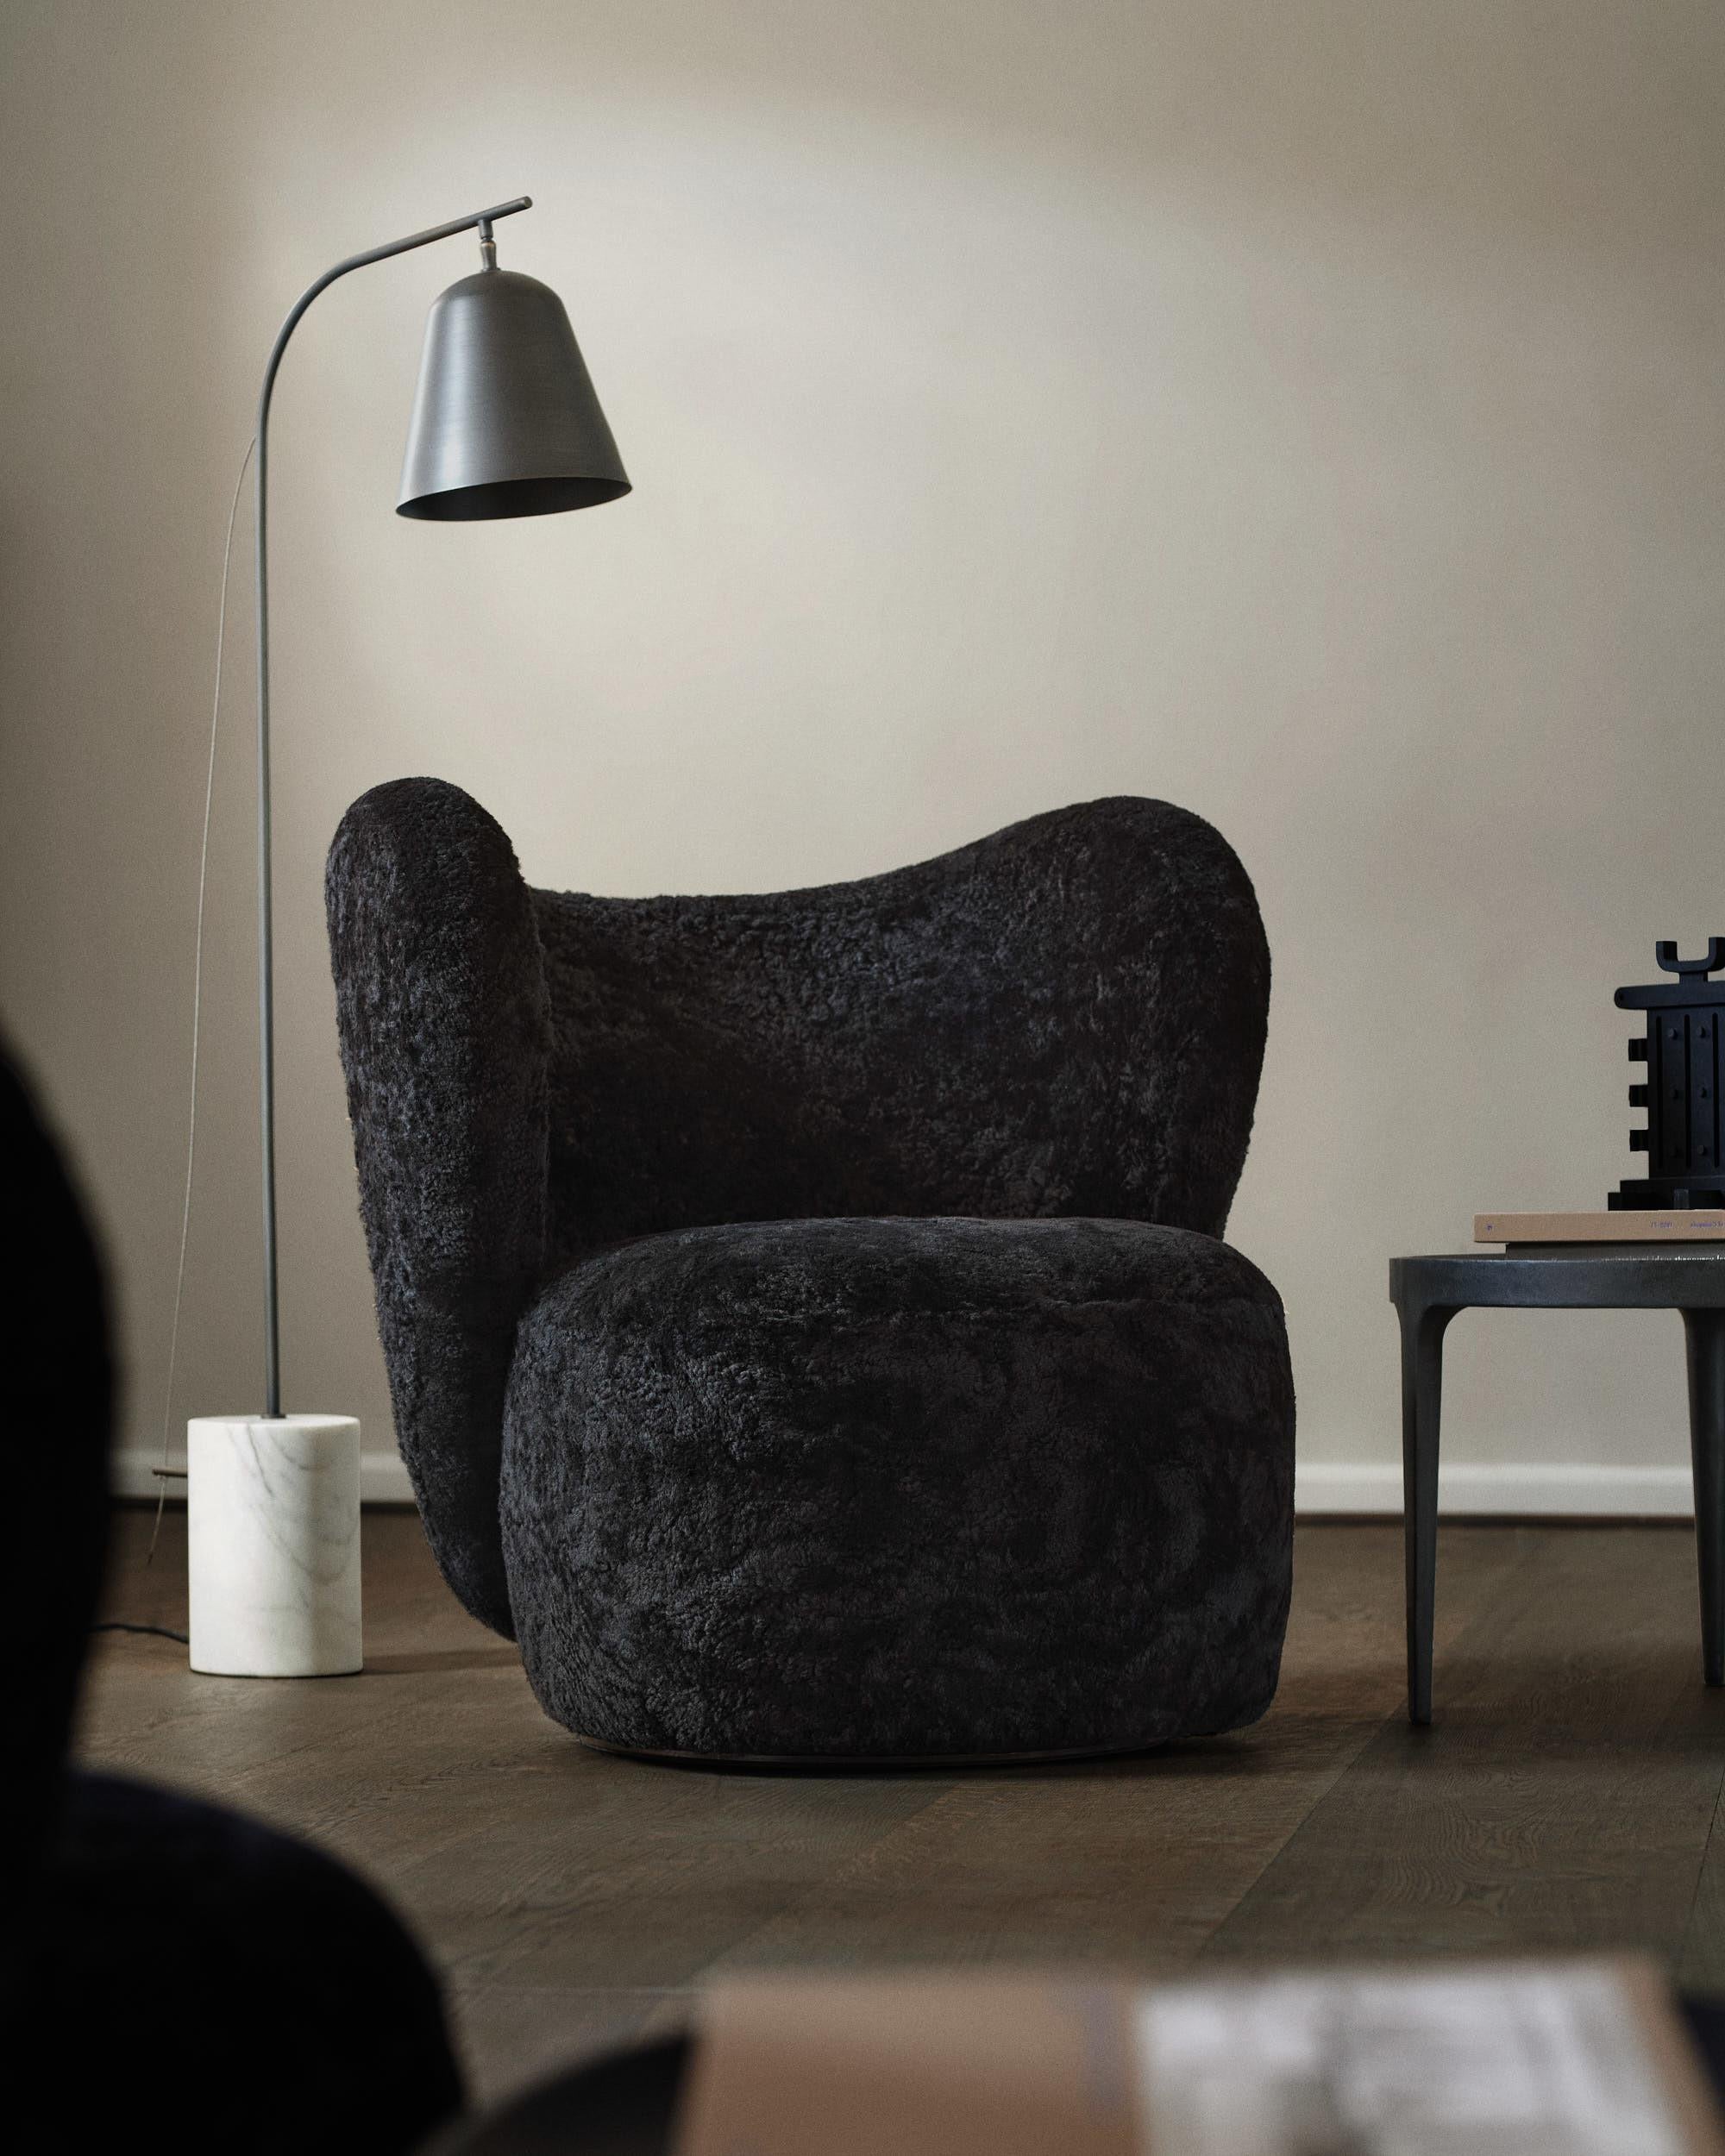 Little big chair armchair
Signed by Kristian Sofus Hansen and Tommy Hyldahl for Norr11. 

Model shown on the picture:
Fabric: Sheepskin (01 Black)
Made in Italy

Appropriately named, the Big Big Chair is the bigger version of the compact